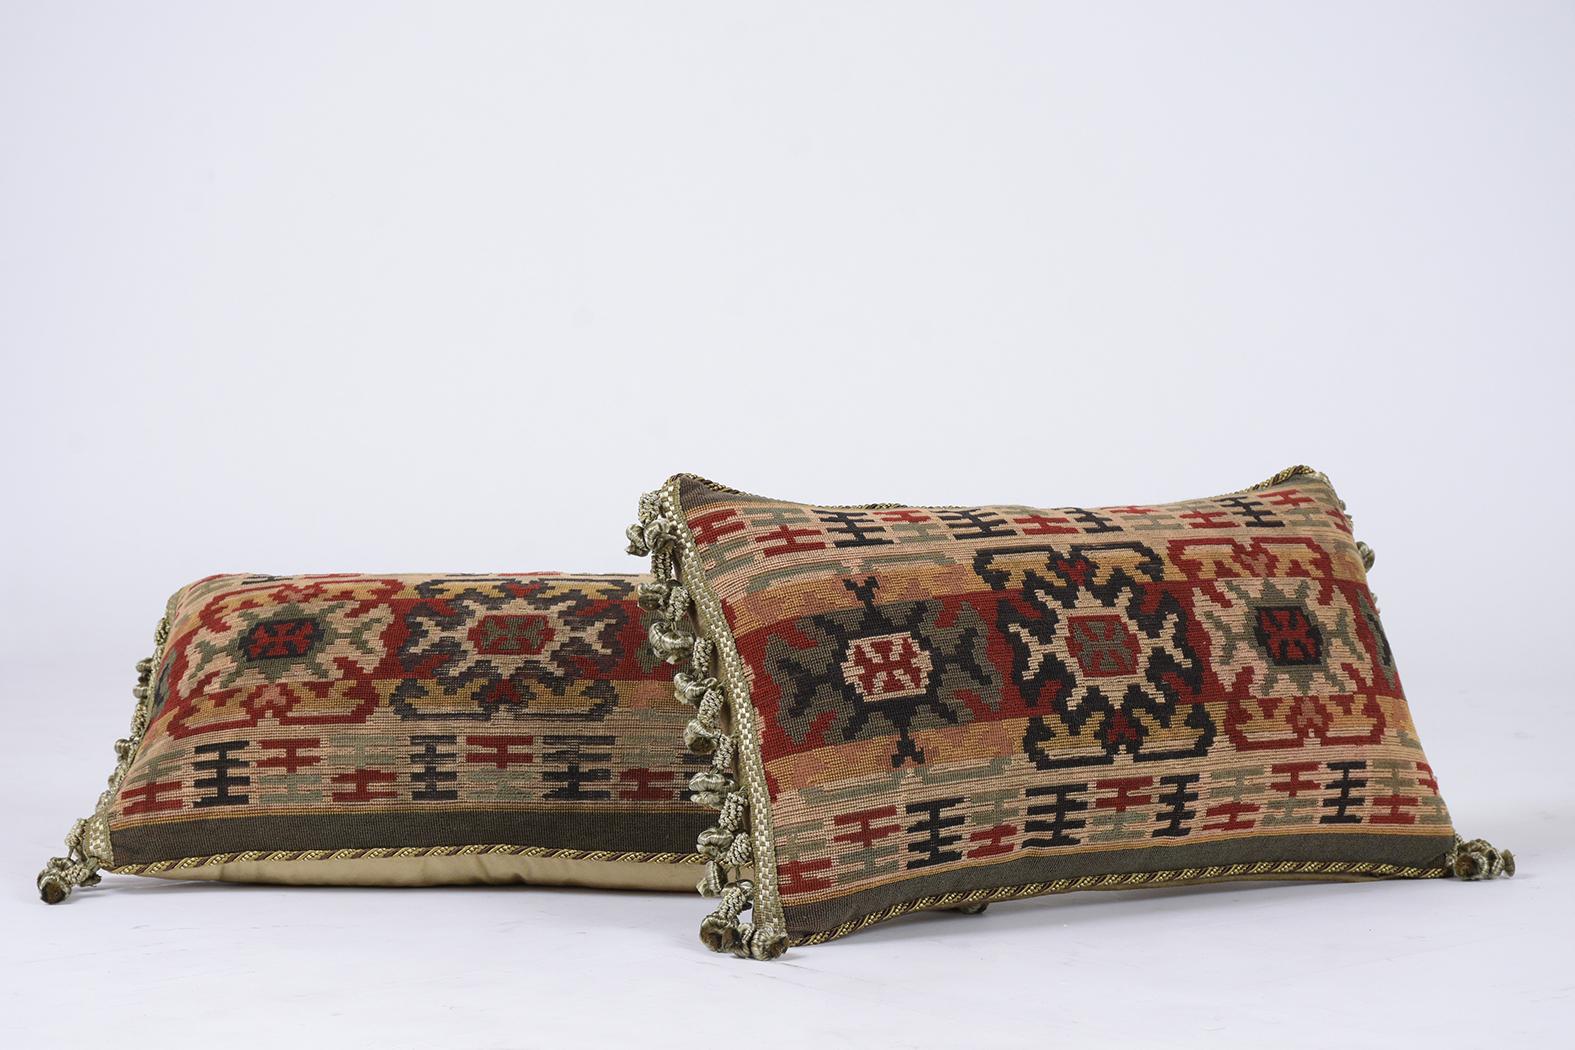 This beautiful pair of French 19th century accent decorative pillows are made out of antique floral pattern tapestry and have a gold color velvet fabric on the sides and back. They are also beautifully finished with decorative multicolored tassels,